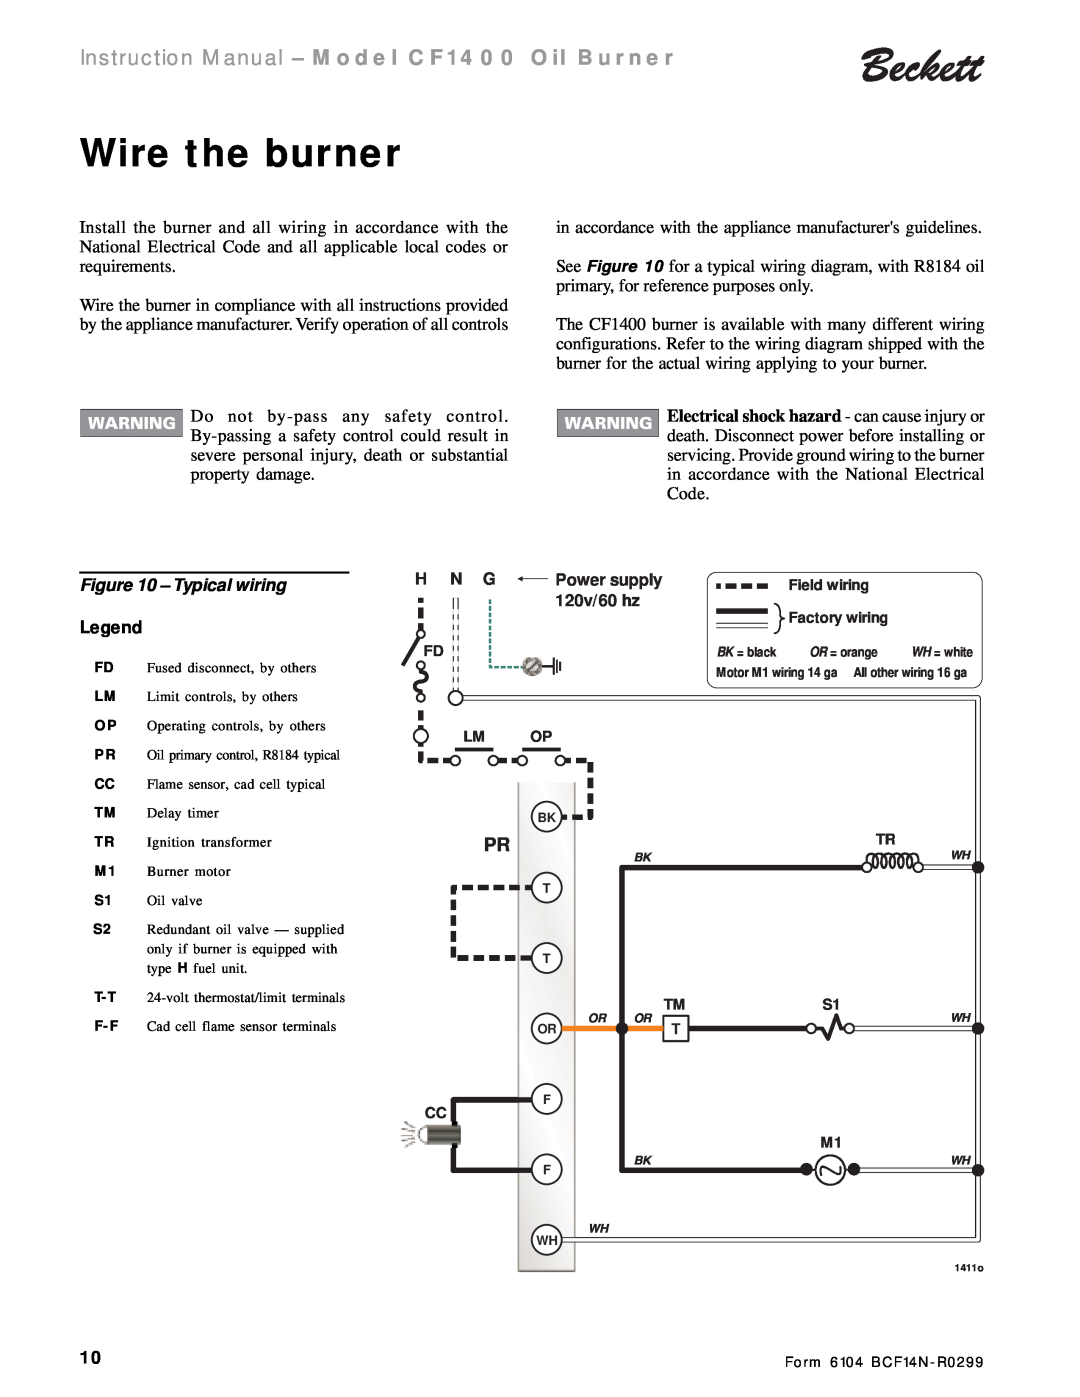 Beckett CF 1400 instruction manual Wire the burner, Typical wiring, Instruction Manual - Model CF1400 Oil Burner 